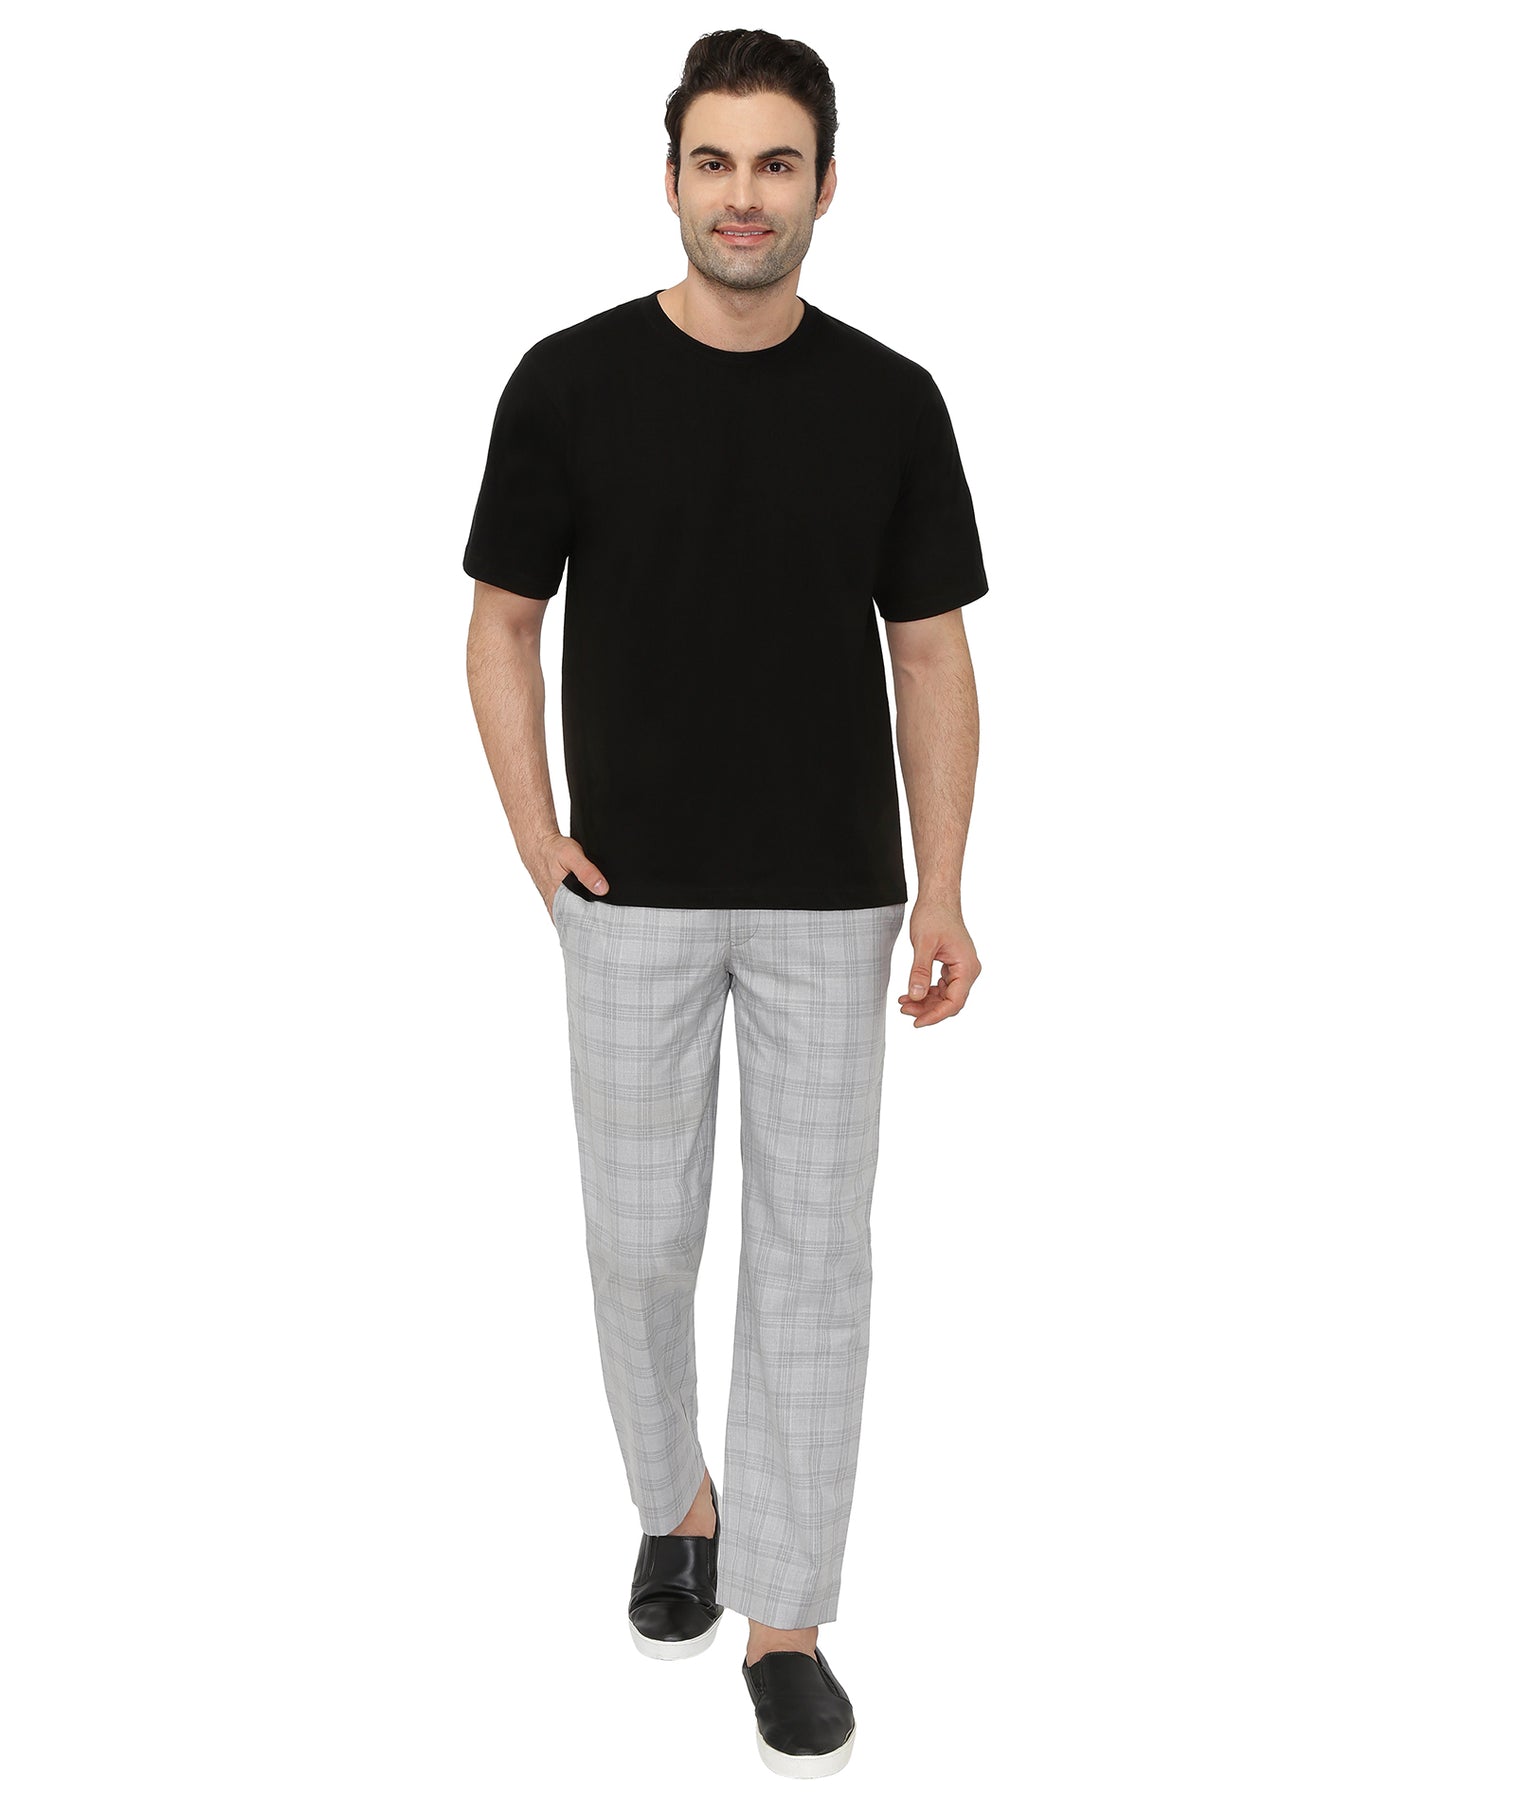 Style White T-shirt with Formal Pants | Menswear | Tee with Pants | White  Tee | Grey Check Trousers | Checked trousers, Mens formal wear, Brown  brogues